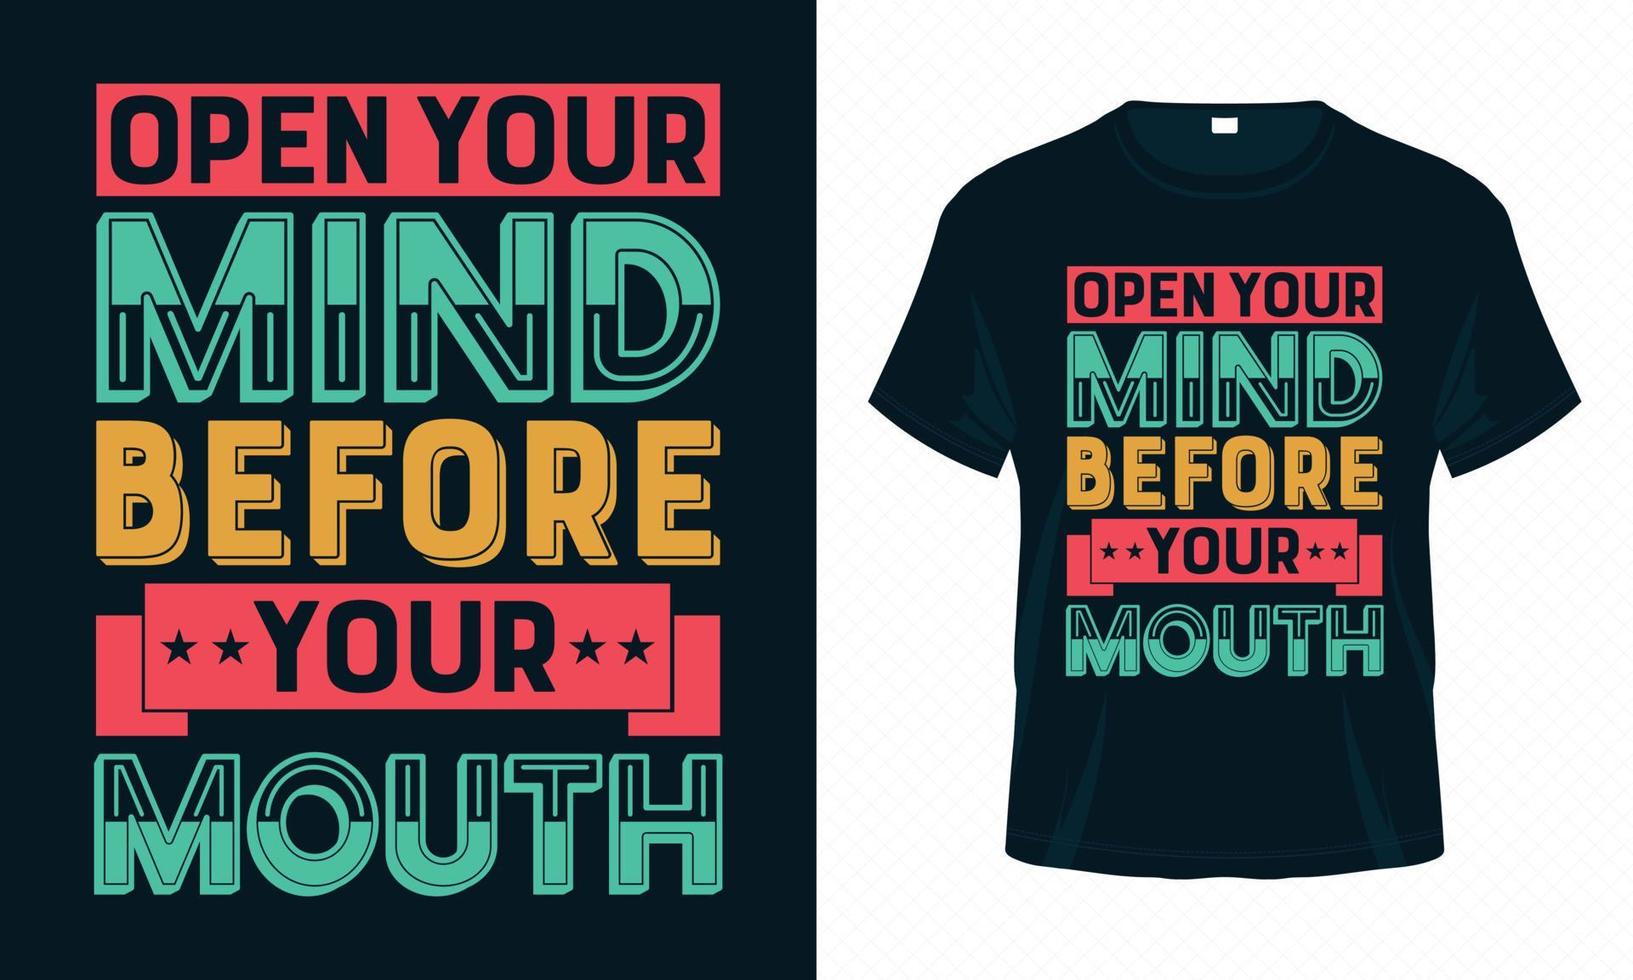 Open Your Mind Before Your Mouth-Motivational Typography T-shirt Design Vector. Inspirational Quotes for Clothes, Greeting Card, Poster, Tote Bag and Mug Design. vector